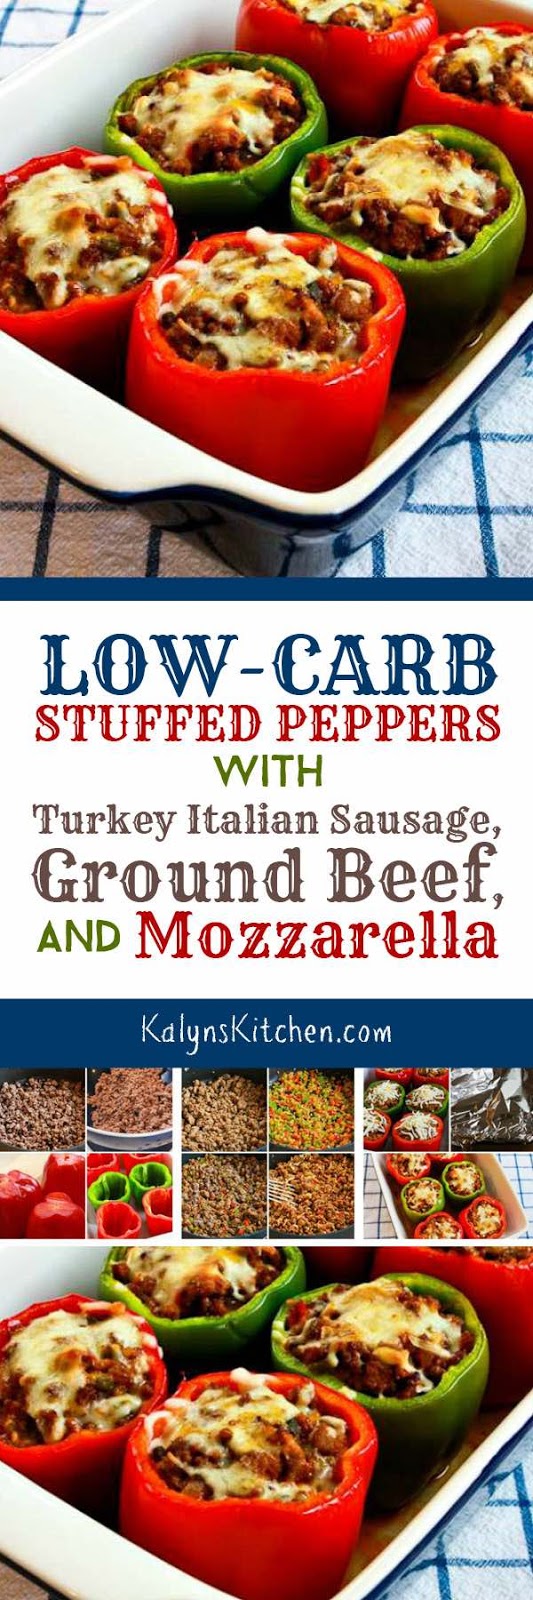 Low-Carb Stuffed Peppers with Turkey Italian Sausage, Ground Beef, and ...